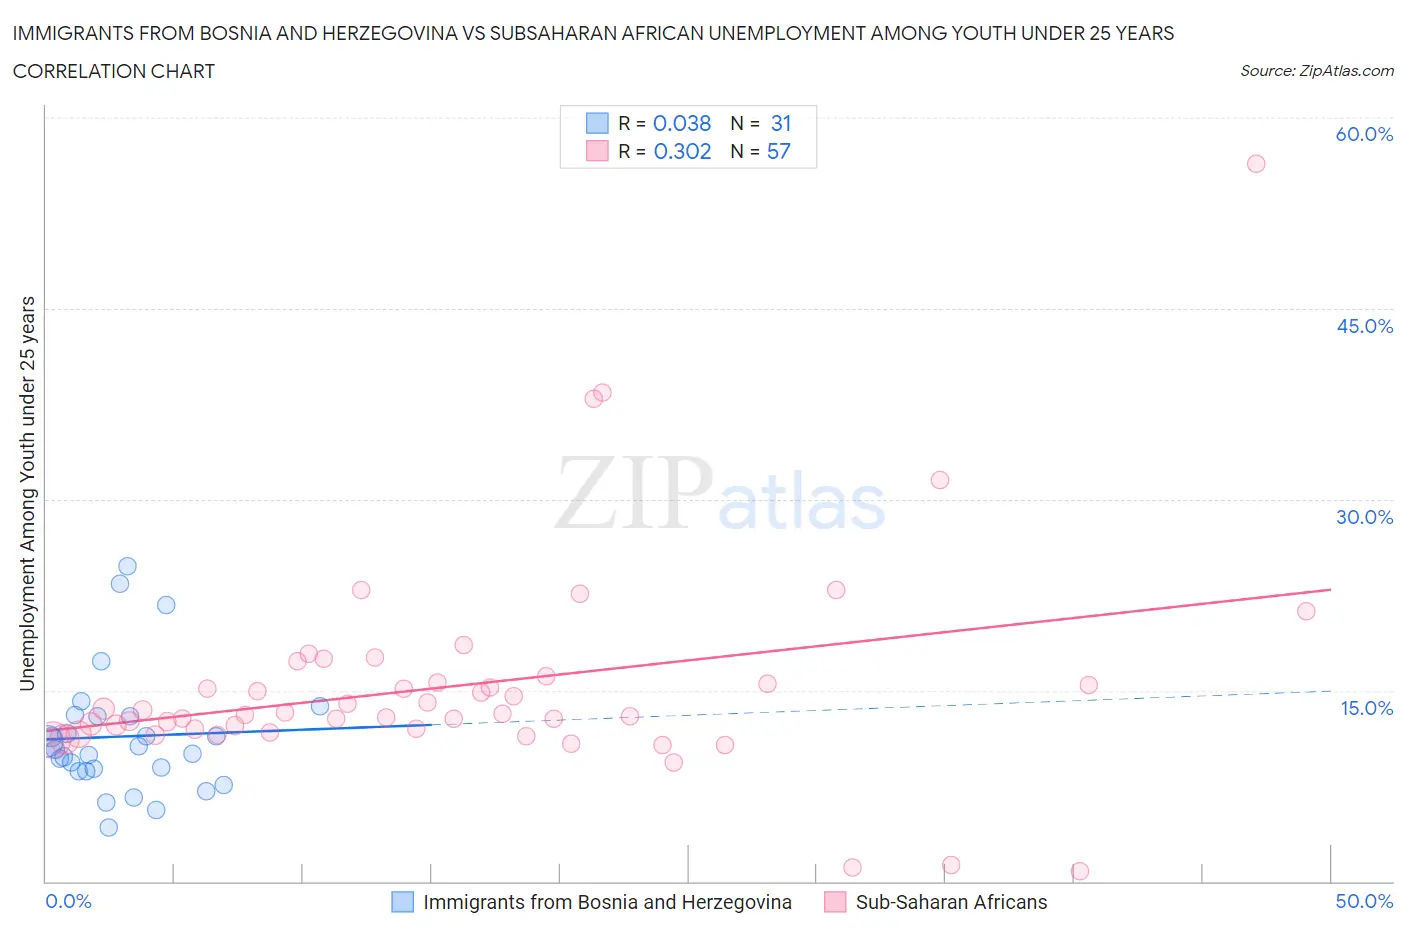 Immigrants from Bosnia and Herzegovina vs Subsaharan African Unemployment Among Youth under 25 years